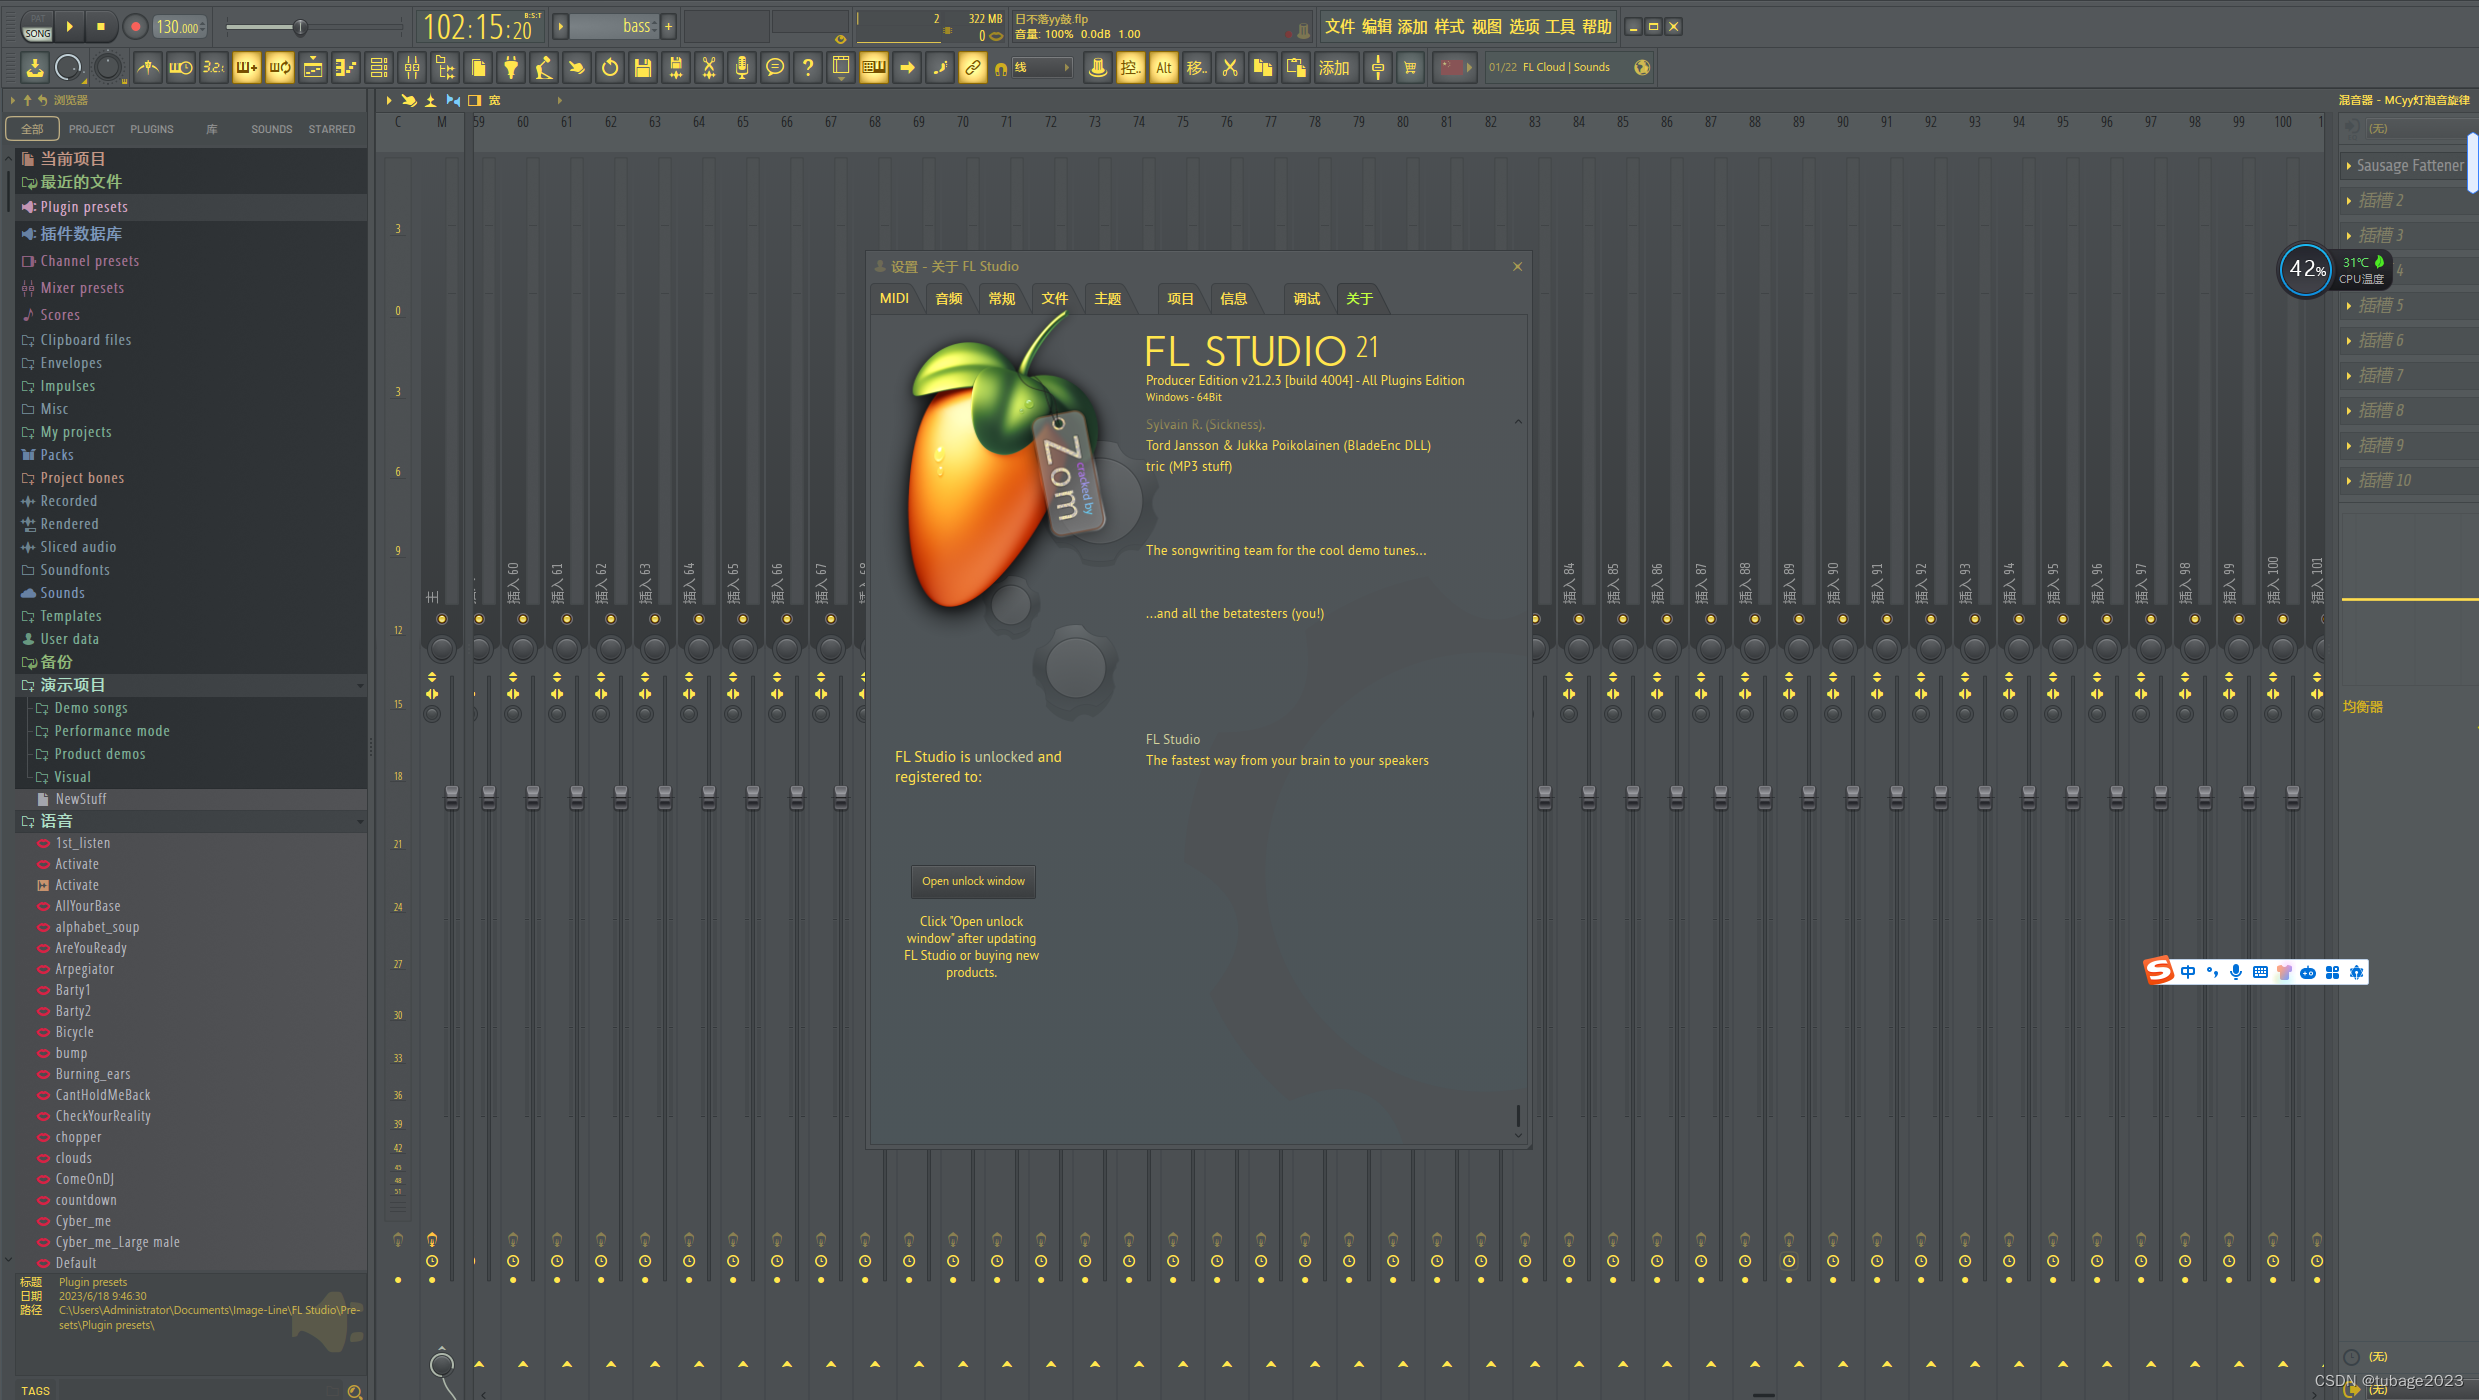 macOS - FL Studio 21.2.3.3586<span style='color:red;'>官方</span><span style='color:red;'>中文</span><span style='color:red;'>破解</span><span style='color:red;'>版</span><span style='color:red;'>免费</span><span style='color:red;'>下载</span>安装<span style='color:red;'>激活</span>